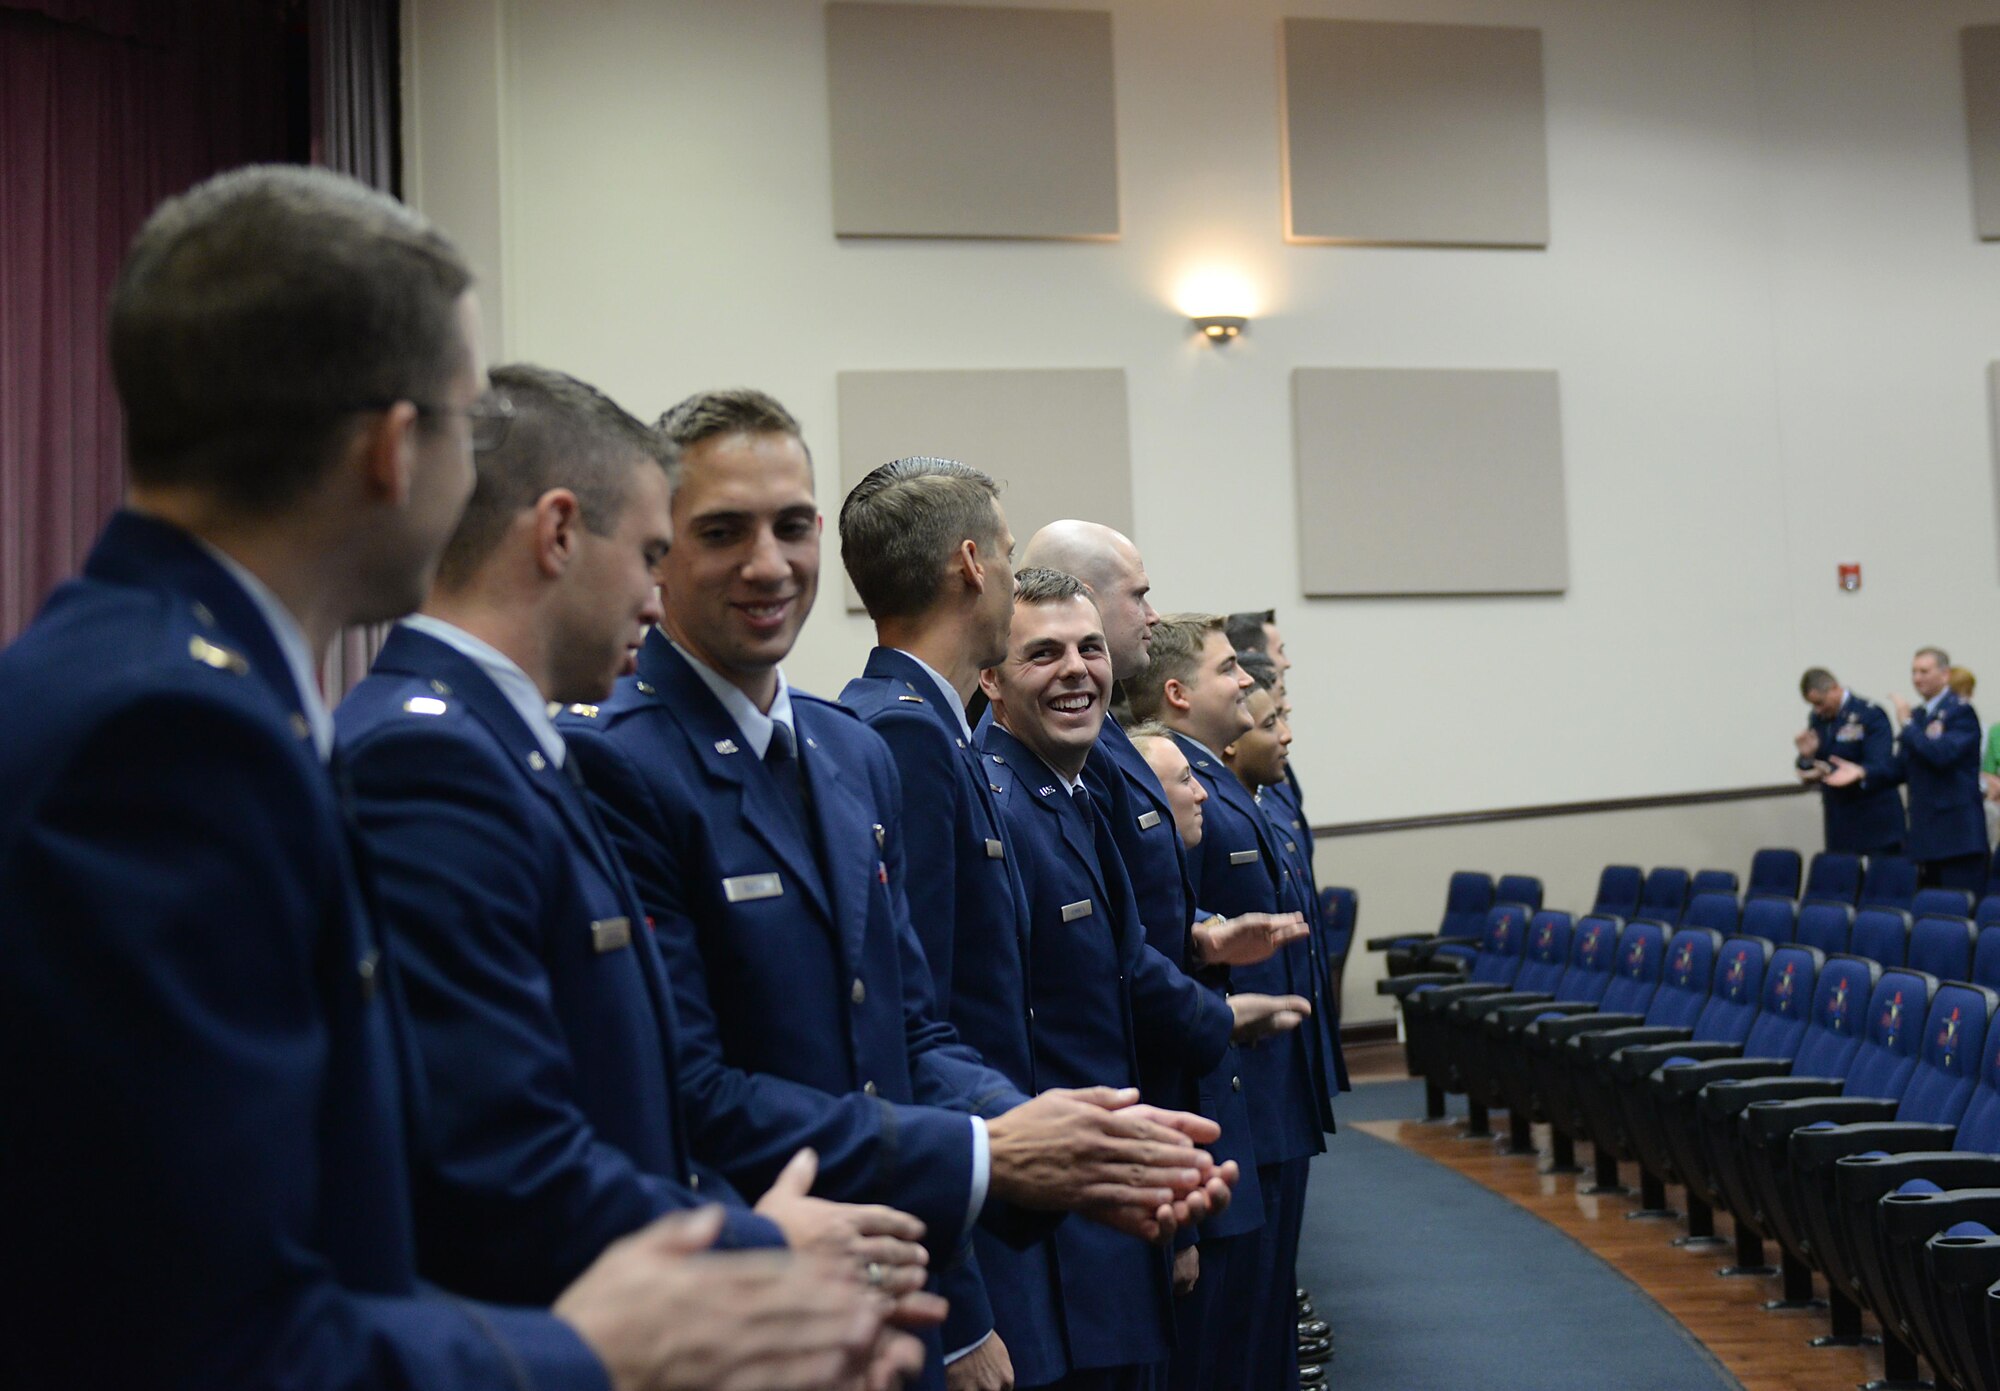 Specialized Undergraduate Pilot Training Class 17-11 celebrates after earning their wings on Columbus Air Force Base, Mississippi, June 30, 2017. Twenty-four officers graduated with SUPT Class 17-11. (U.S. Air Force photo by Airman 1st Class Keith Holcomb)